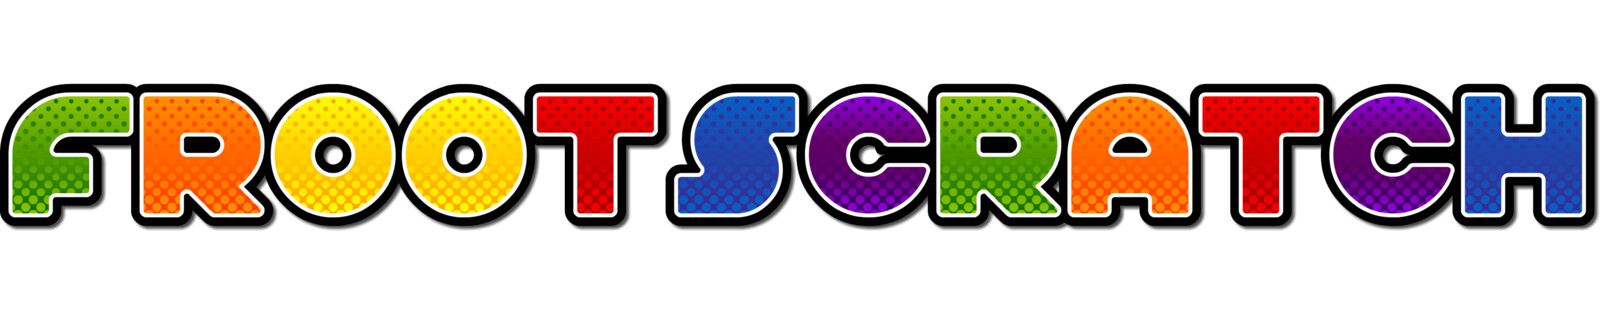 Froot Scratch Logo 1 Line
(NOTE: graphic not trimmed due to Artstation minimum height/width requirements)